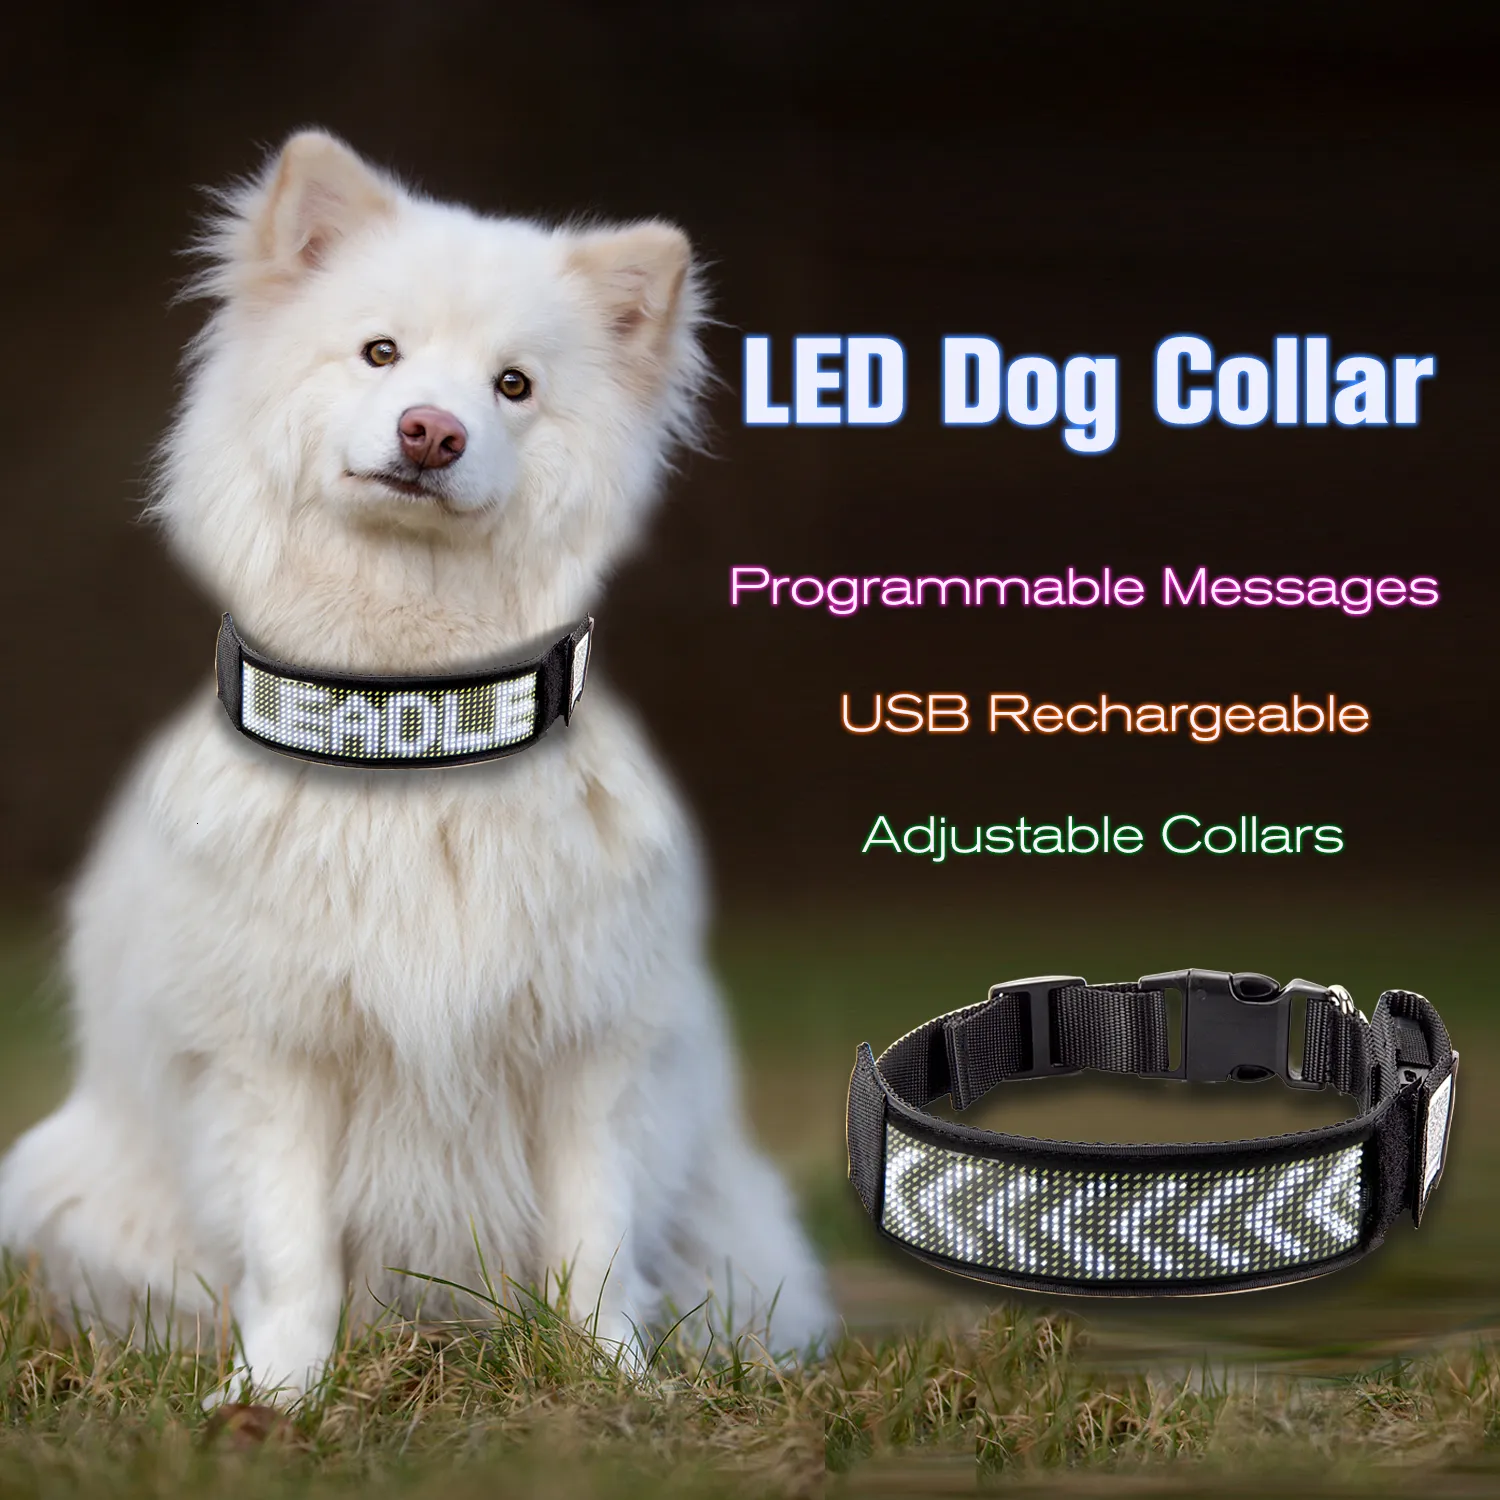 Dog Collars Leashes UNTSMART Led Collar Programmable Bluetooth Scrolling Light lluminated MultiColored Personalized Text Graphics White 230816